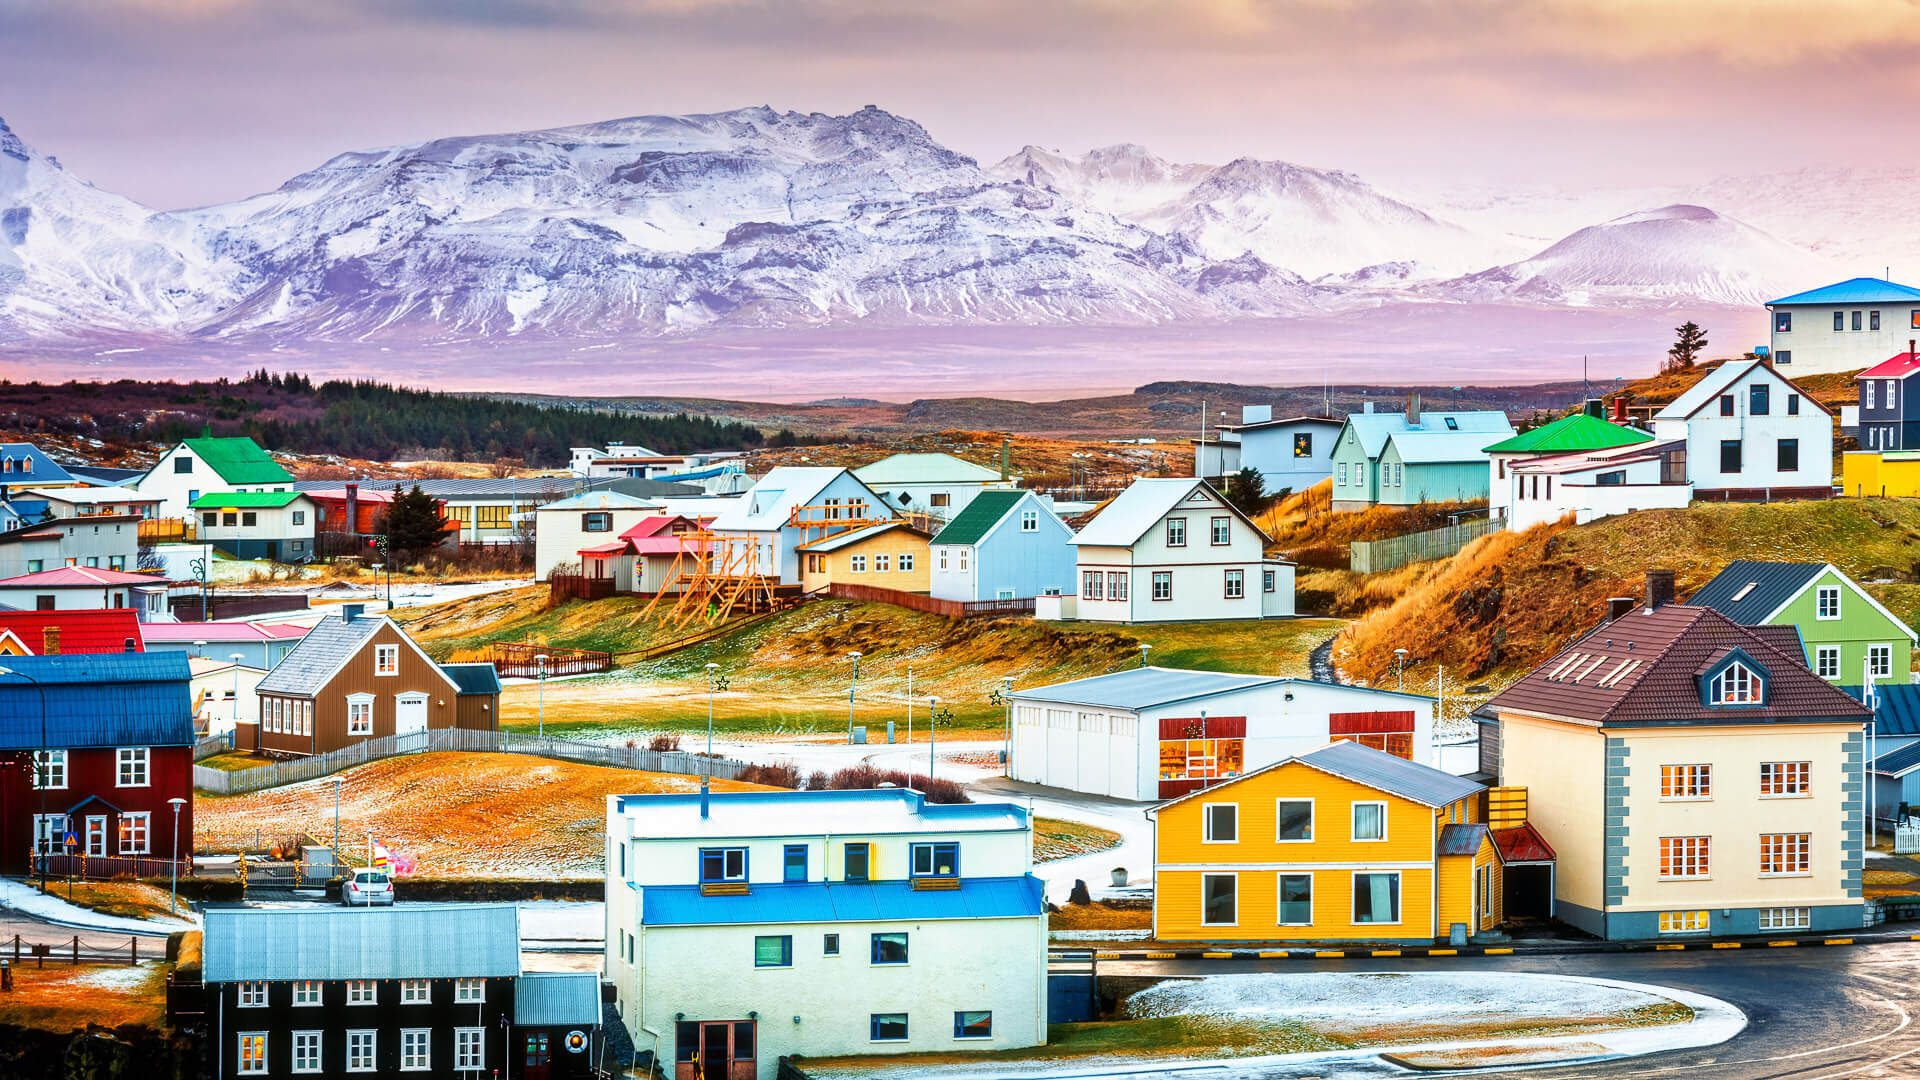 <p><span>Iceland offers a long-term visa for remote work for those with a monthly income of 1 million ISK ($7,817) or more. The visa is good for up to 180 days. There is a $95 fee to apply.</span></p> <p><span>To enter Iceland, you must be vaccinated or have had a prior COVID-19 infection, and present a negative PCR or antigen test prior to boarding a vessel to Iceland.</span></p>